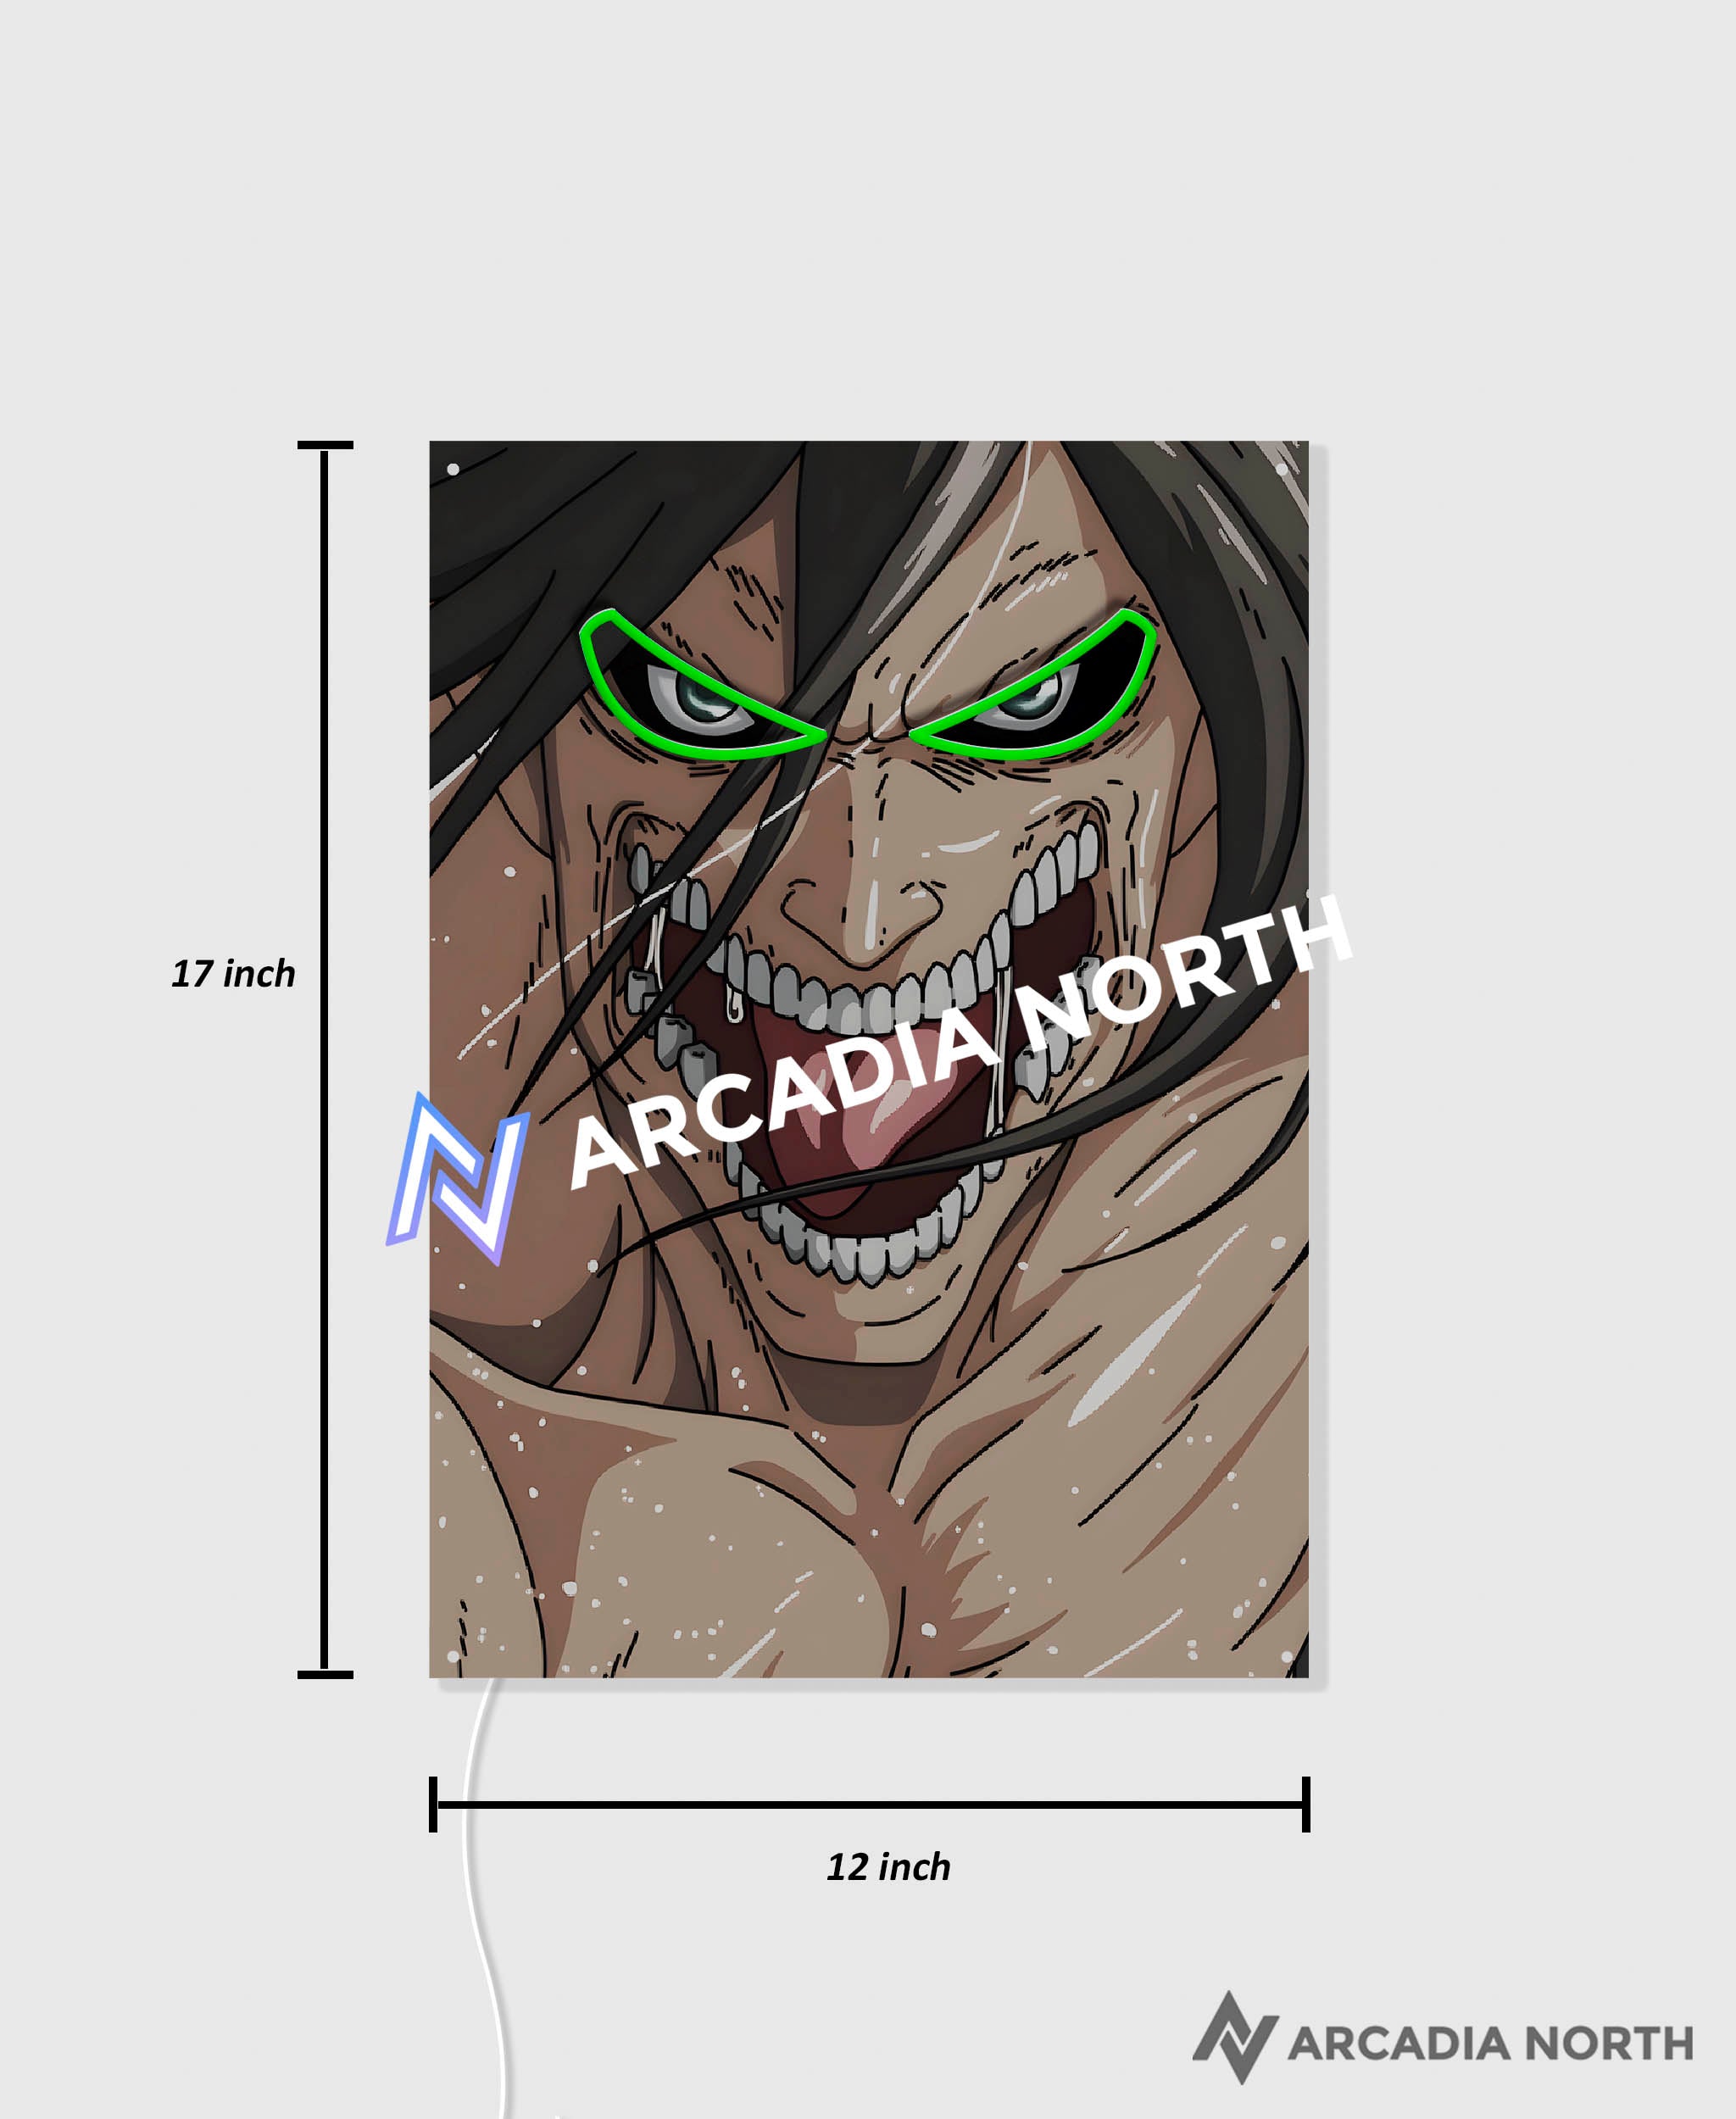 Arcadia North AURALIGHT Original LED Poster featuring the anime Attack on Titan with Eren as the Attack TItan with glowing green eyes. Illuminated by glowing neon LED lights. UV-printed on acrylic.